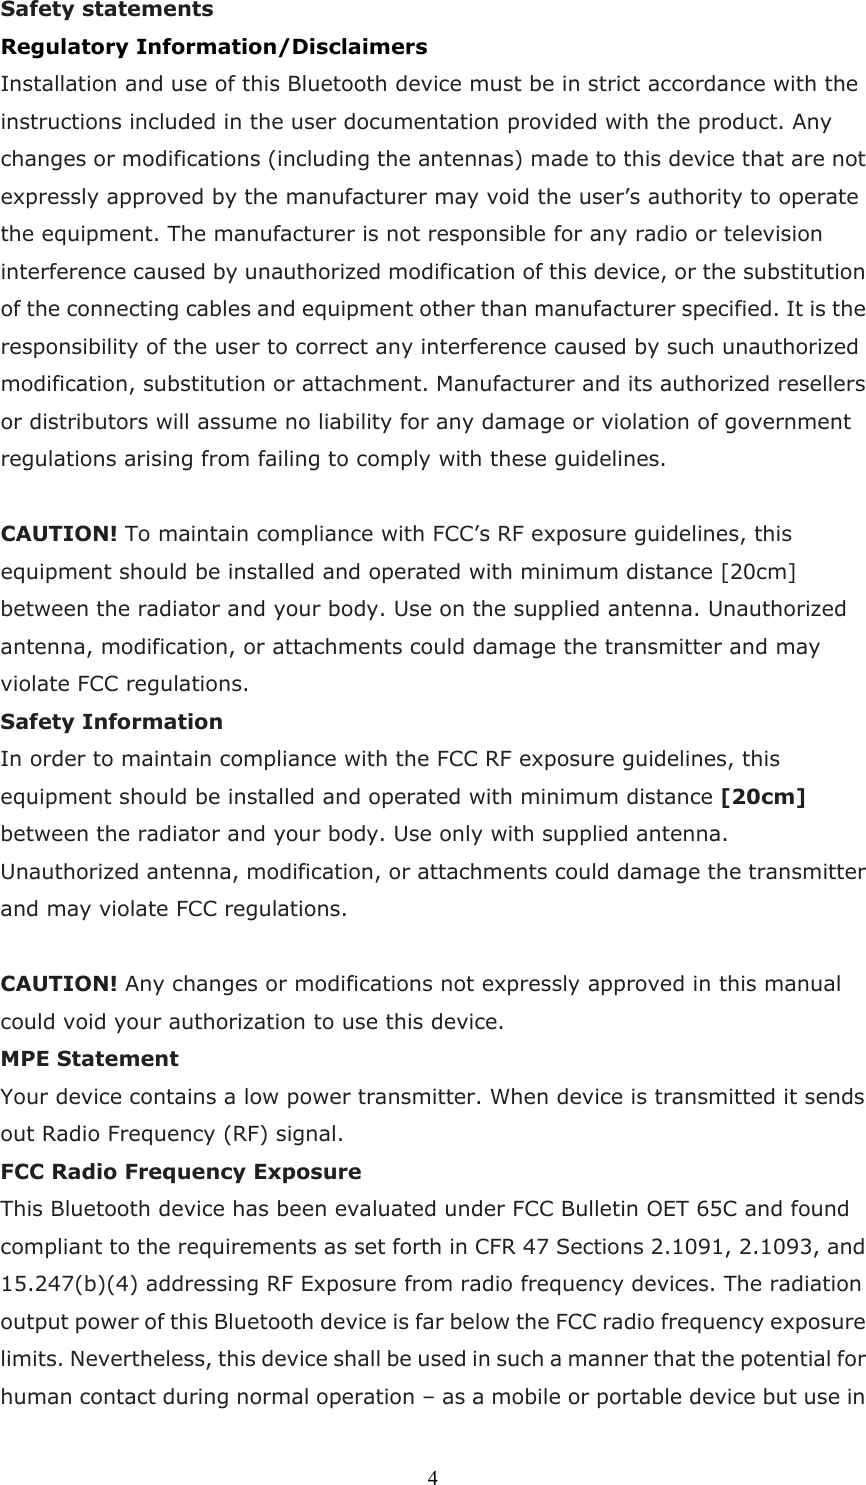  4Safety statements   Regulatory Information/Disclaimers Installation and use of this Bluetooth device must be in strict accordance with the instructions included in the user documentation provided with the product. Any changes or modifications (including the antennas) made to this device that are not expressly approved by the manufacturer may void the user’s authority to operate the equipment. The manufacturer is not responsible for any radio or television interference caused by unauthorized modification of this device, or the substitution of the connecting cables and equipment other than manufacturer specified. It is the responsibility of the user to correct any interference caused by such unauthorized modification, substitution or attachment. Manufacturer and its authorized resellers or distributors will assume no liability for any damage or violation of government regulations arising from failing to comply with these guidelines.  CAUTION! To maintain compliance with FCC’s RF exposure guidelines, this equipment should be installed and operated with minimum distance [20cm] between the radiator and your body. Use on the supplied antenna. Unauthorized antenna, modification, or attachments could damage the transmitter and may violate FCC regulations. Safety Information In order to maintain compliance with the FCC RF exposure guidelines, this equipment should be installed and operated with minimum distance [20cm] between the radiator and your body. Use only with supplied antenna. Unauthorized antenna, modification, or attachments could damage the transmitter and may violate FCC regulations.  CAUTION! Any changes or modifications not expressly approved in this manual could void your authorization to use this device. MPE Statement Your device contains a low power transmitter. When device is transmitted it sends out Radio Frequency (RF) signal.   FCC Radio Frequency Exposure This Bluetooth device has been evaluated under FCC Bulletin OET 65C and found compliant to the requirements as set forth in CFR 47 Sections 2.1091, 2.1093, and 15.247(b)(4) addressing RF Exposure from radio frequency devices. The radiation output power of this Bluetooth device is far below the FCC radio frequency exposure limits. Nevertheless, this device shall be used in such a manner that the potential for human contact during normal operation – as a mobile or portable device but use in 